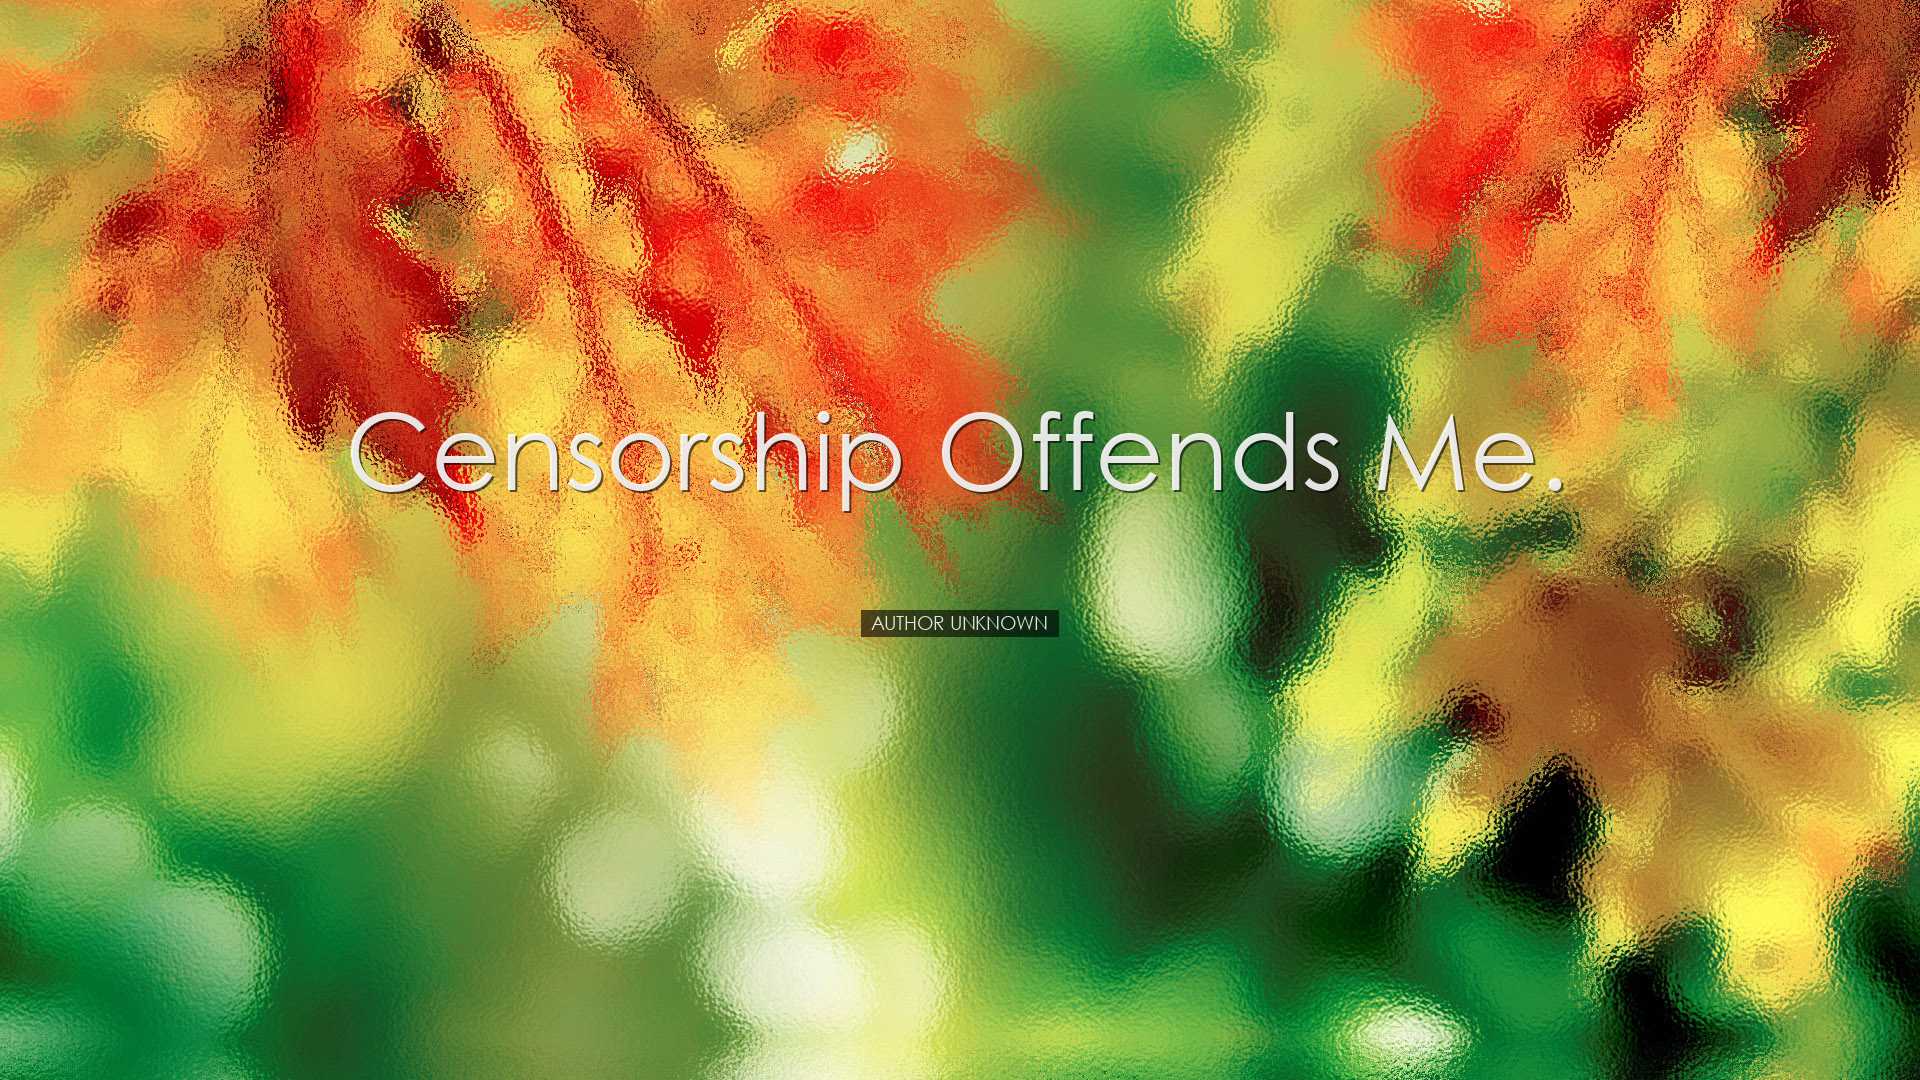 Censorship offends me. - Author Unknown